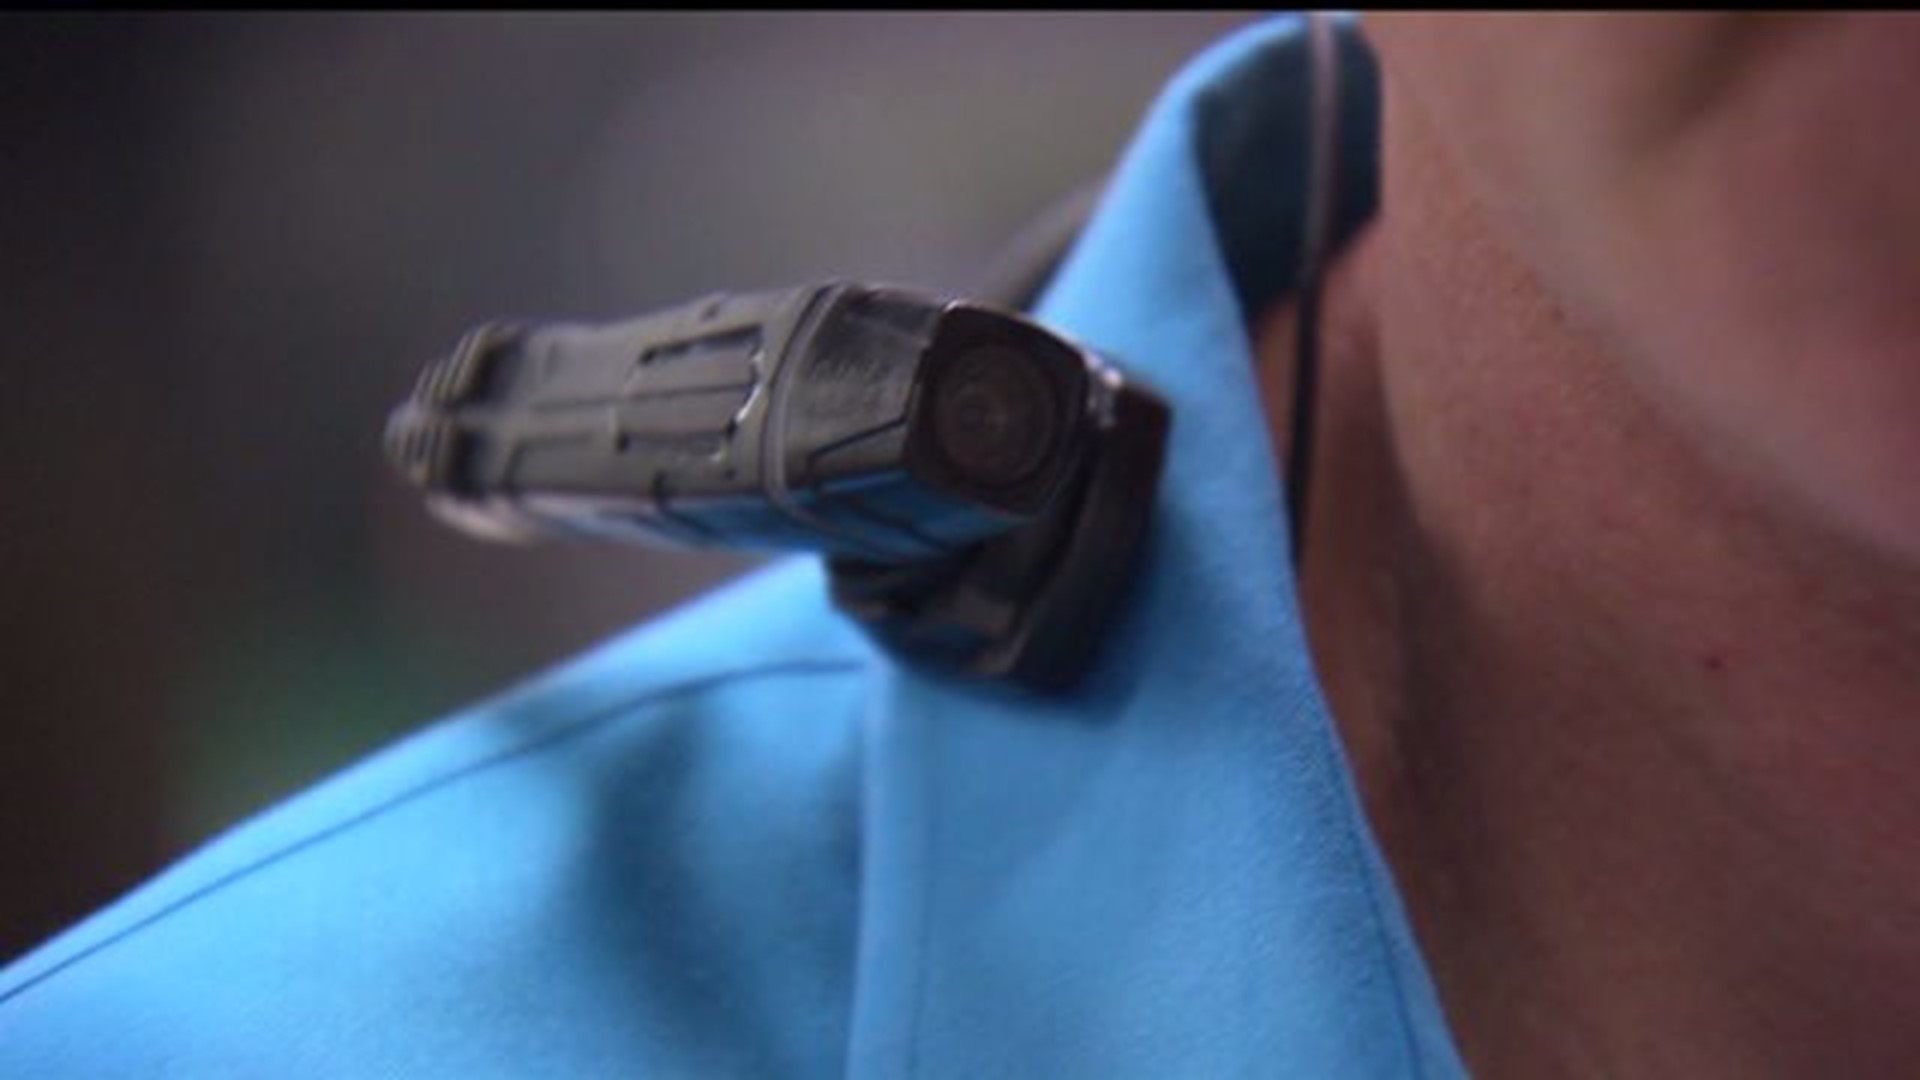 More Police Departments Using Body Camera Technology